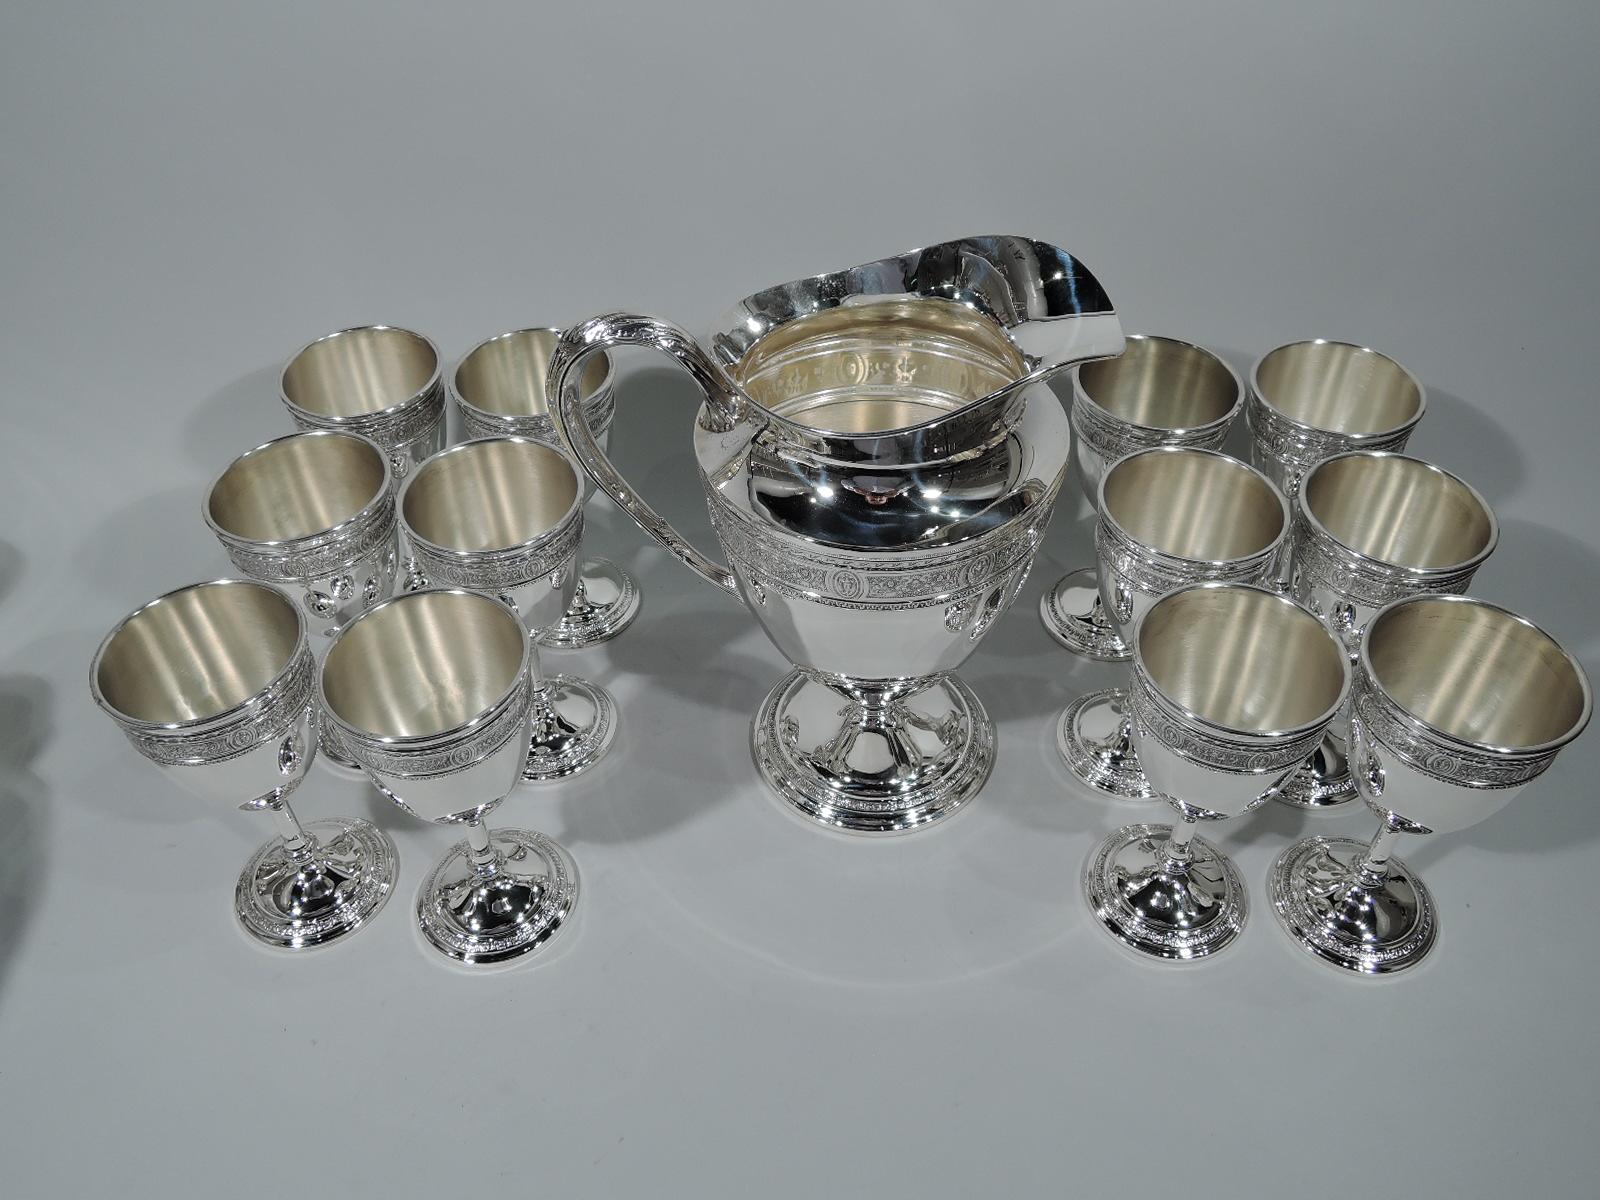 Neoclassical sterling silver drinks set in Wedgwood pattern. Made by International in Meriden, Conn. This set comprises 1 water pitcher and 12 goblets.

Pitcher: Ovoid body, helmet mouth, leaf-capped scroll handle, and stepped foot. Each goblet: